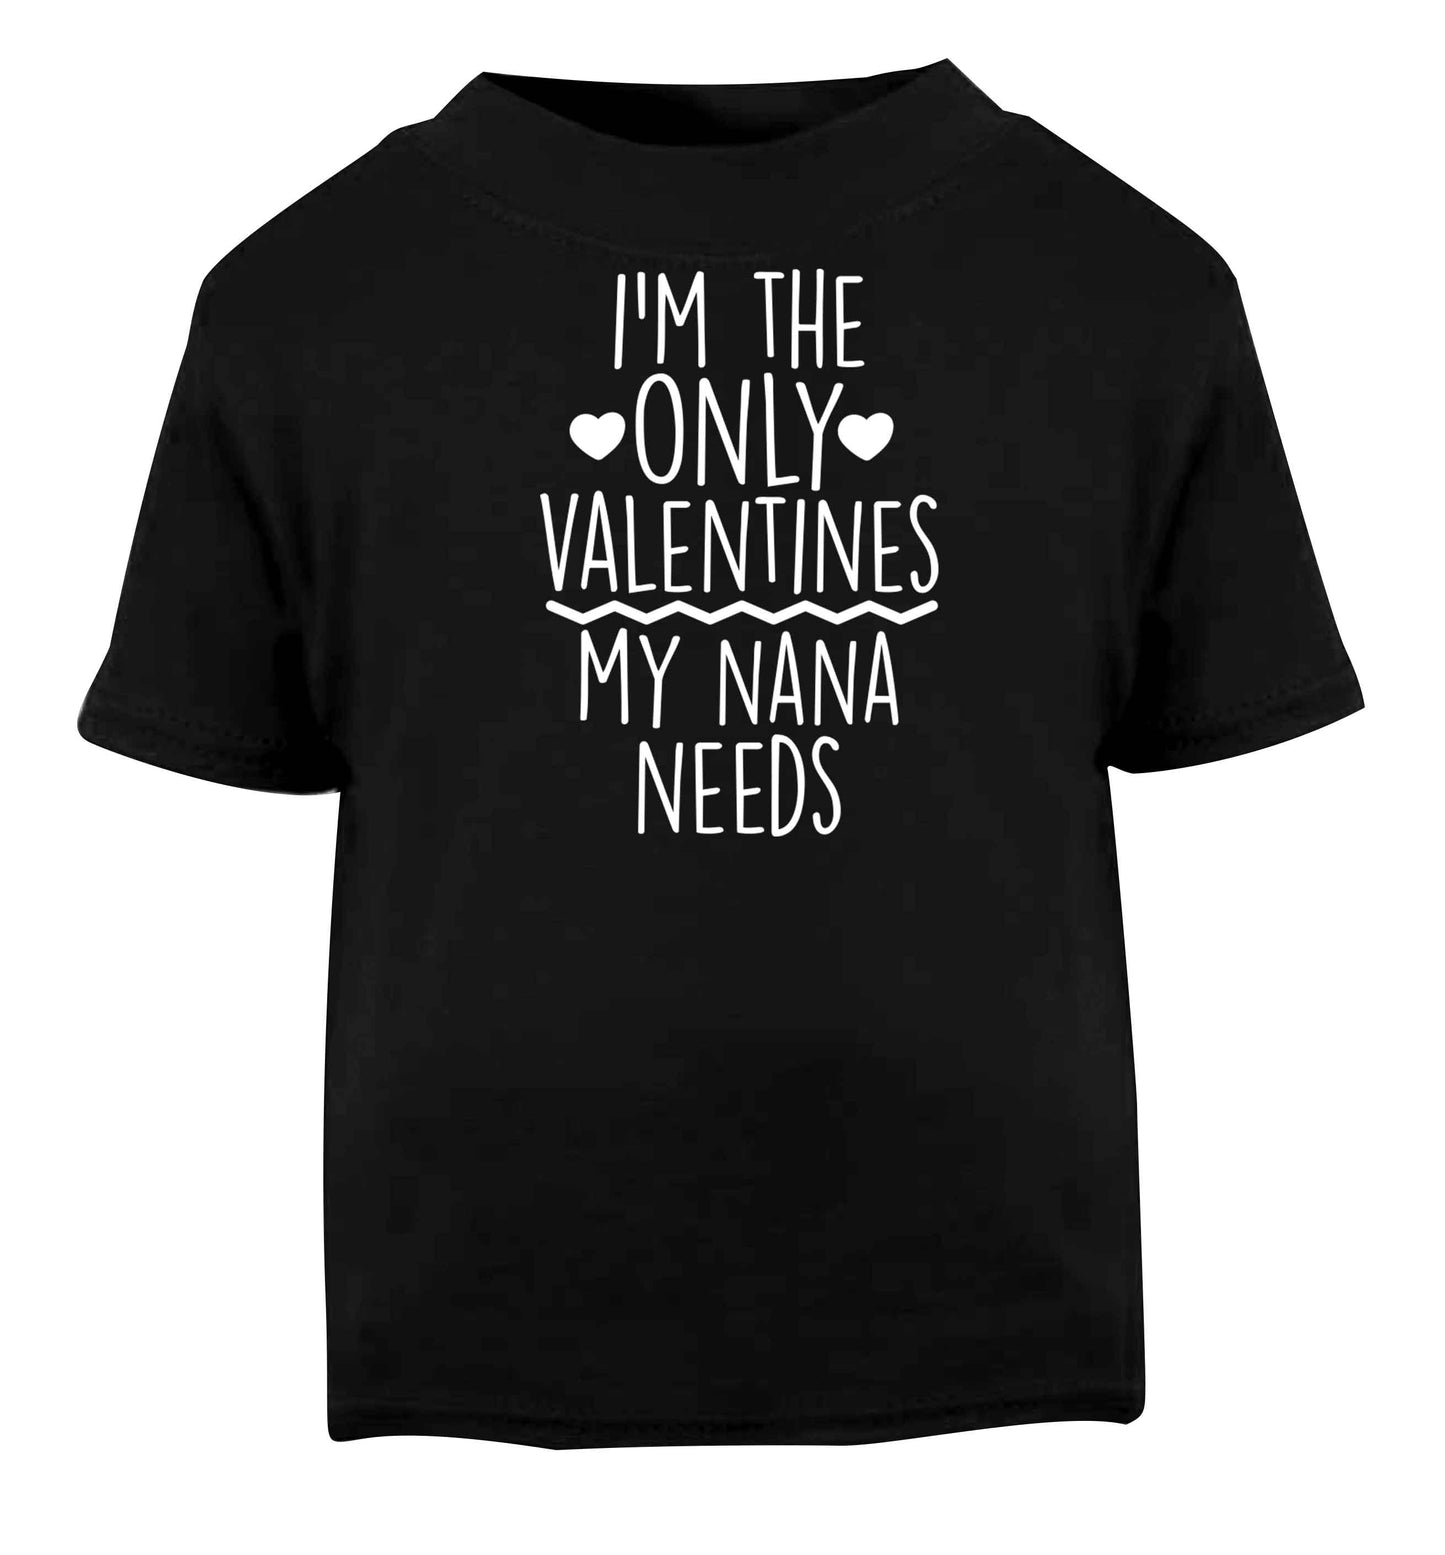 I'm the only valentines my nana needs Black baby toddler Tshirt 2 years